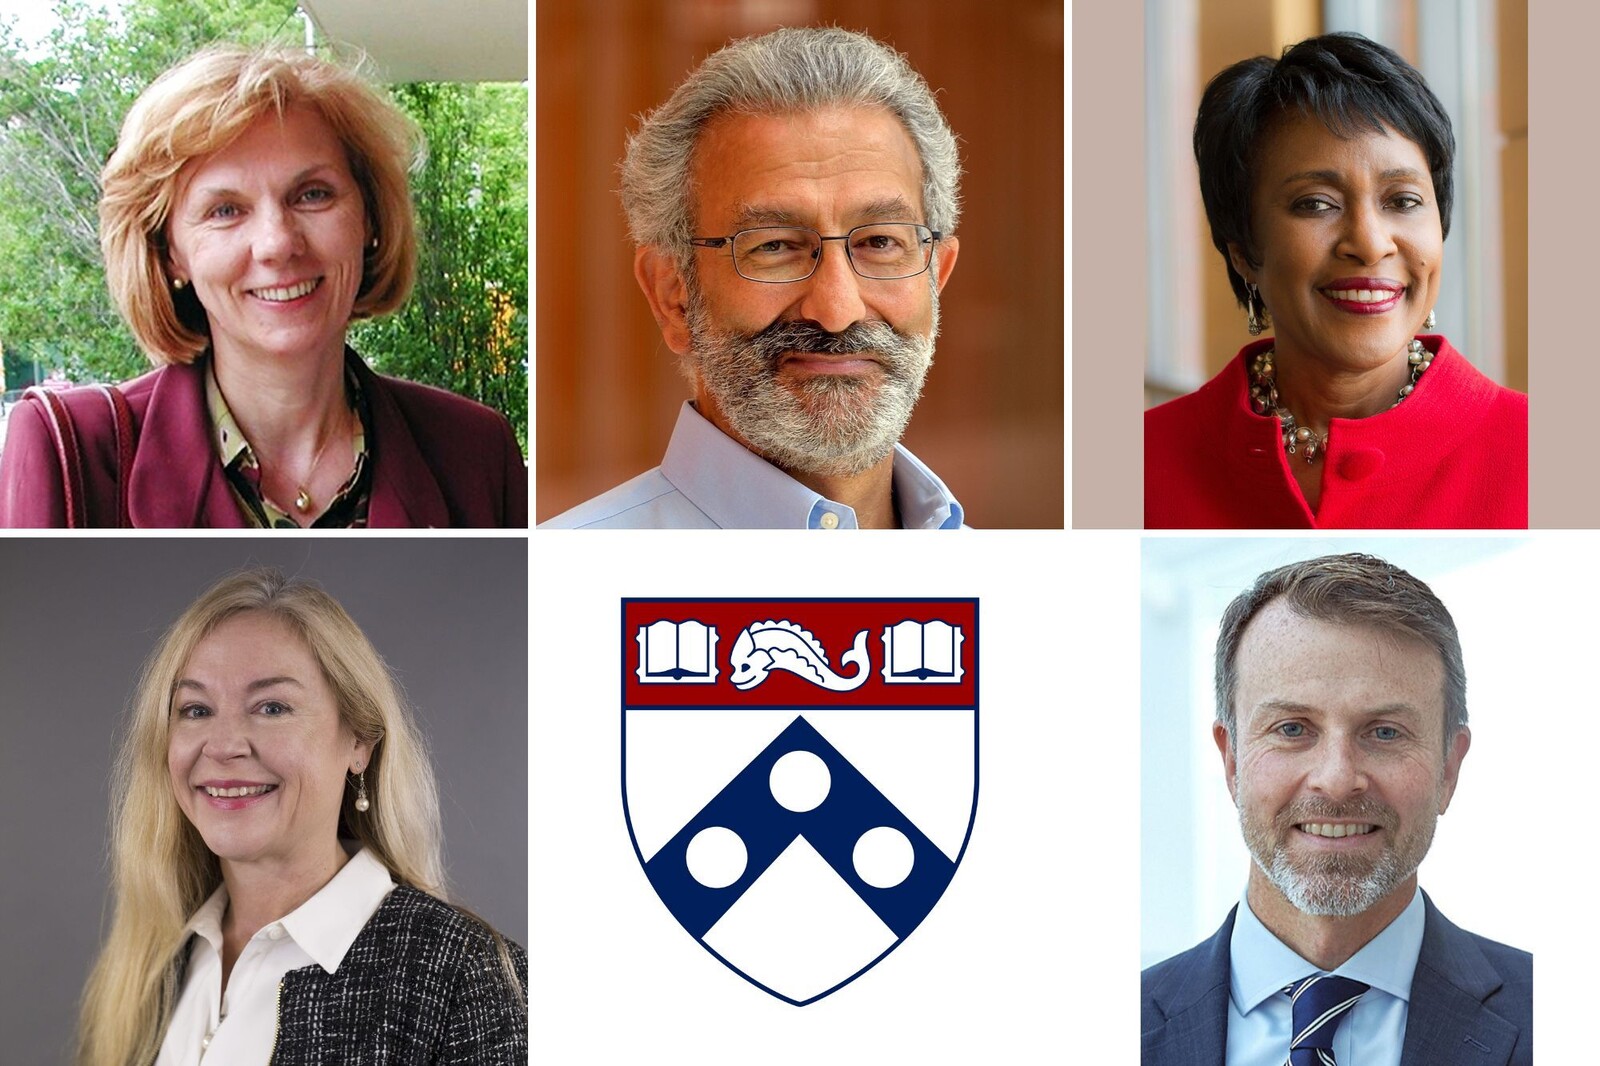 American Academy of Arts and Sciences elected faculty